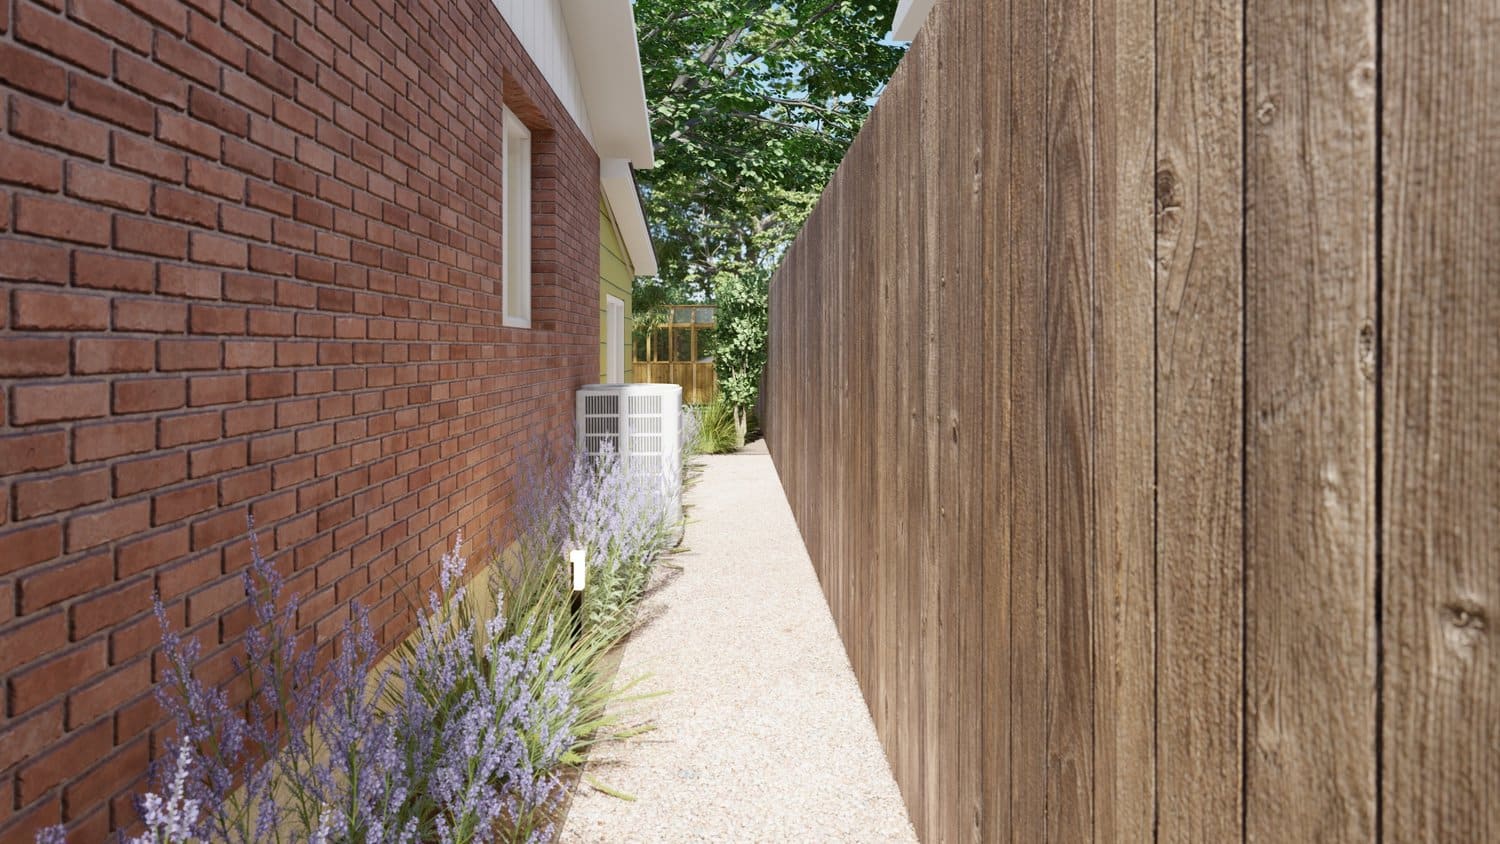 Cheyenne side yard walkway with plants and wooden fence